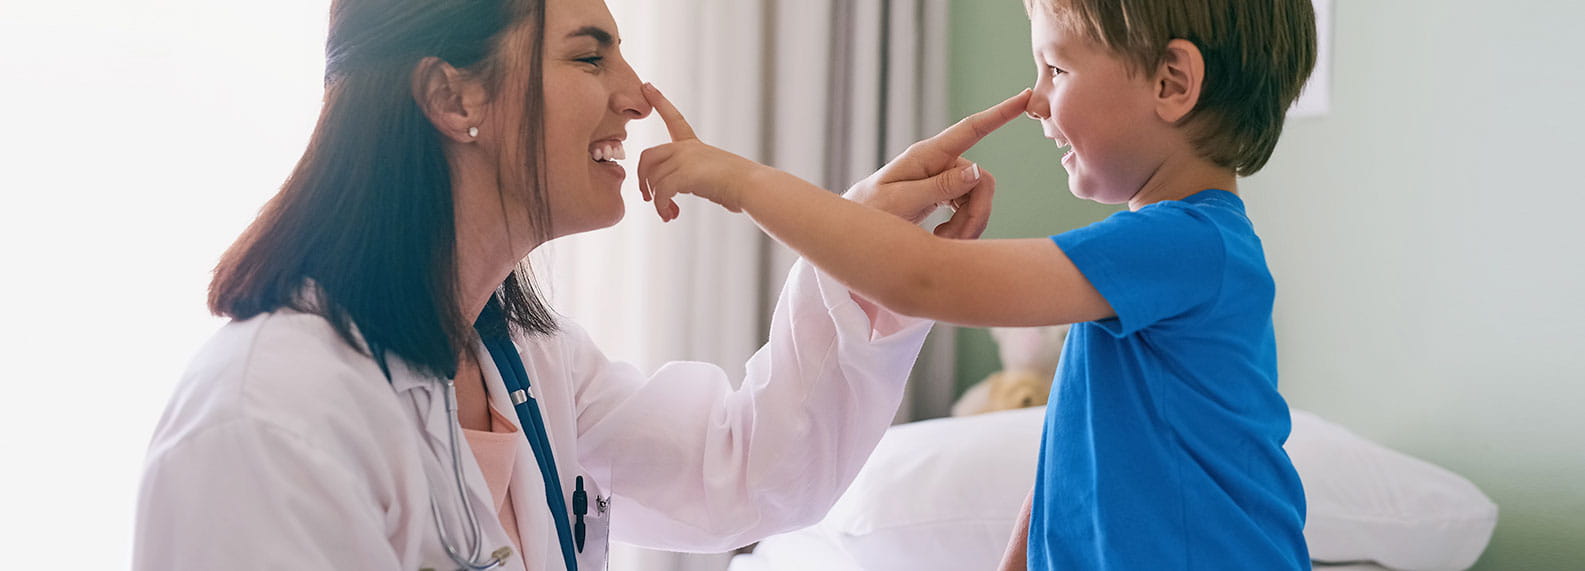 Pediatrician and toddler playfully touching each other’s noses.